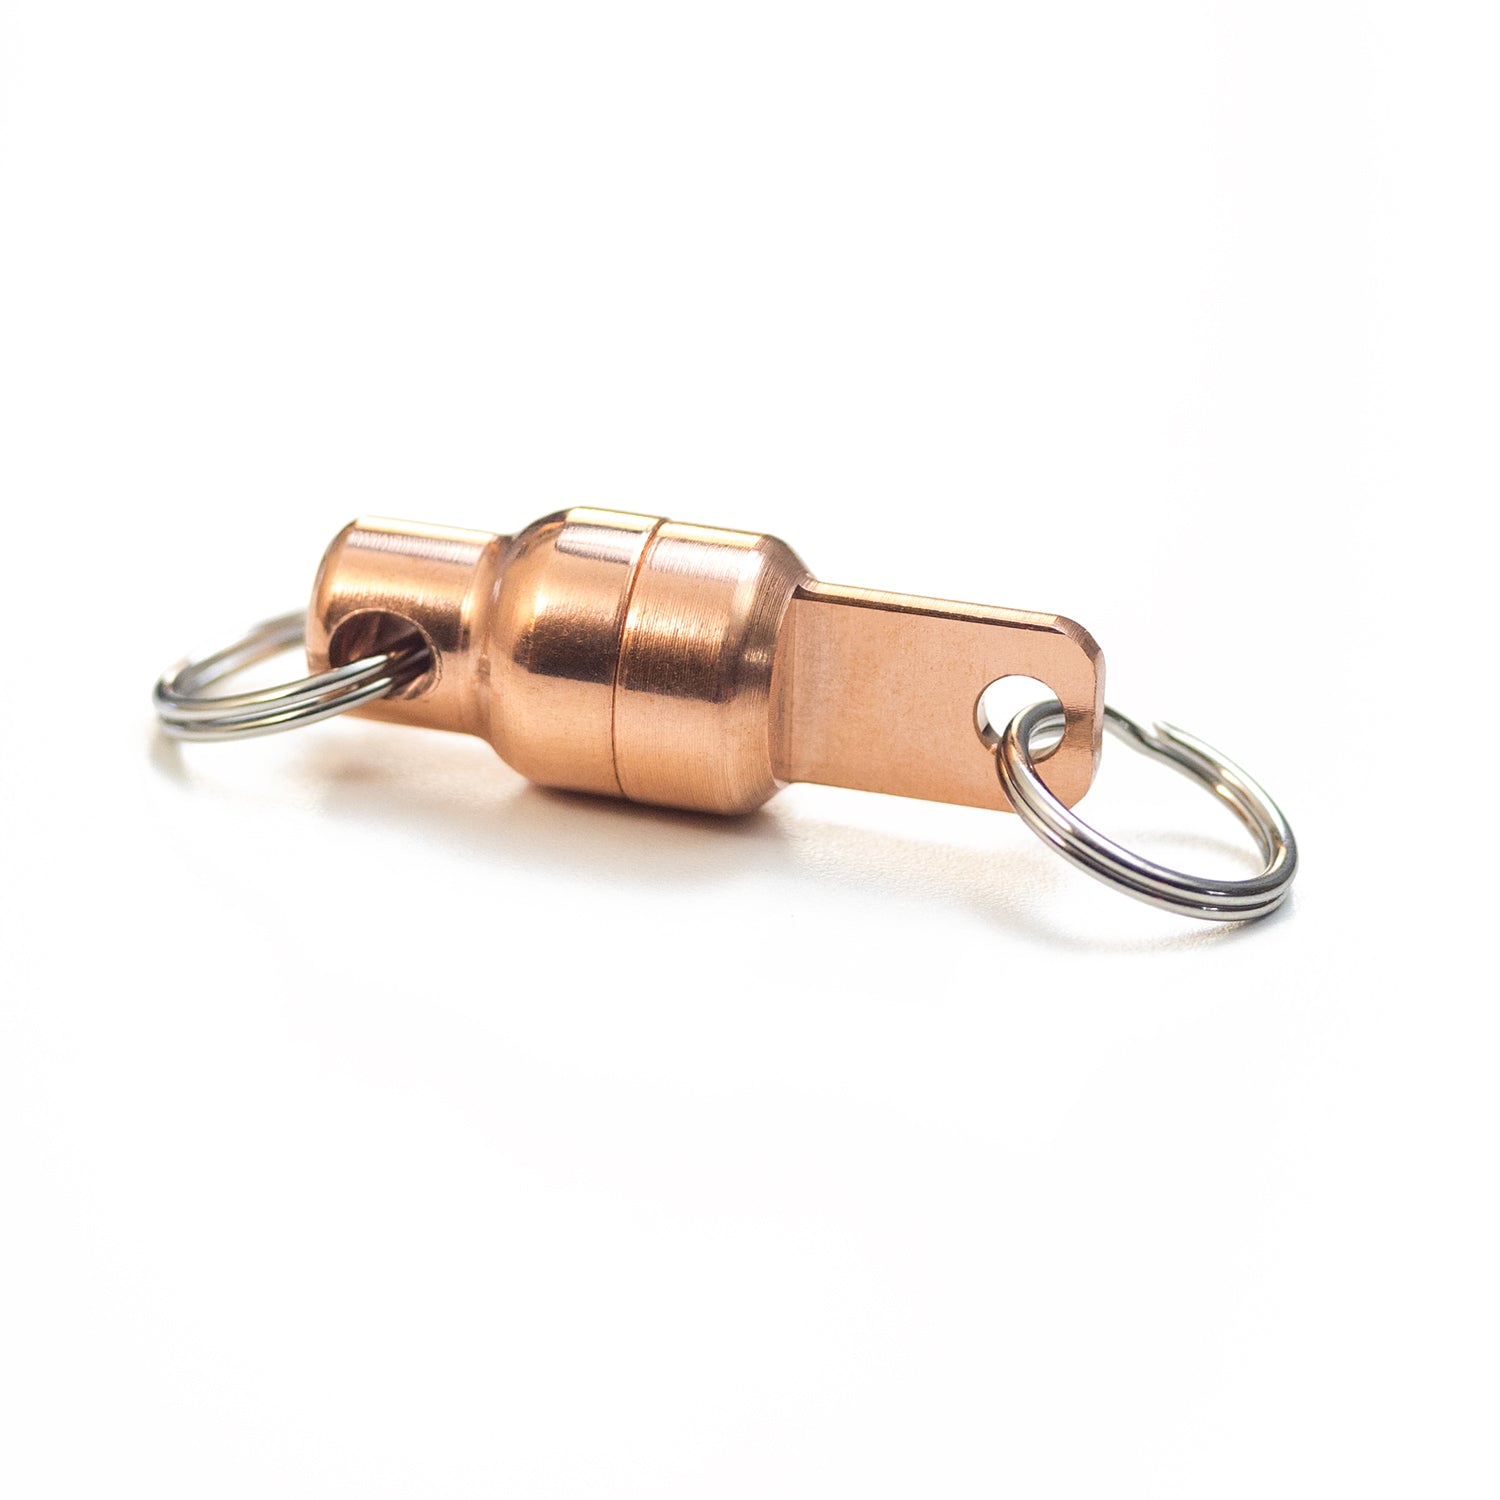 Limited Edition Keyport Copper KO Quick Release by Urban Carvers